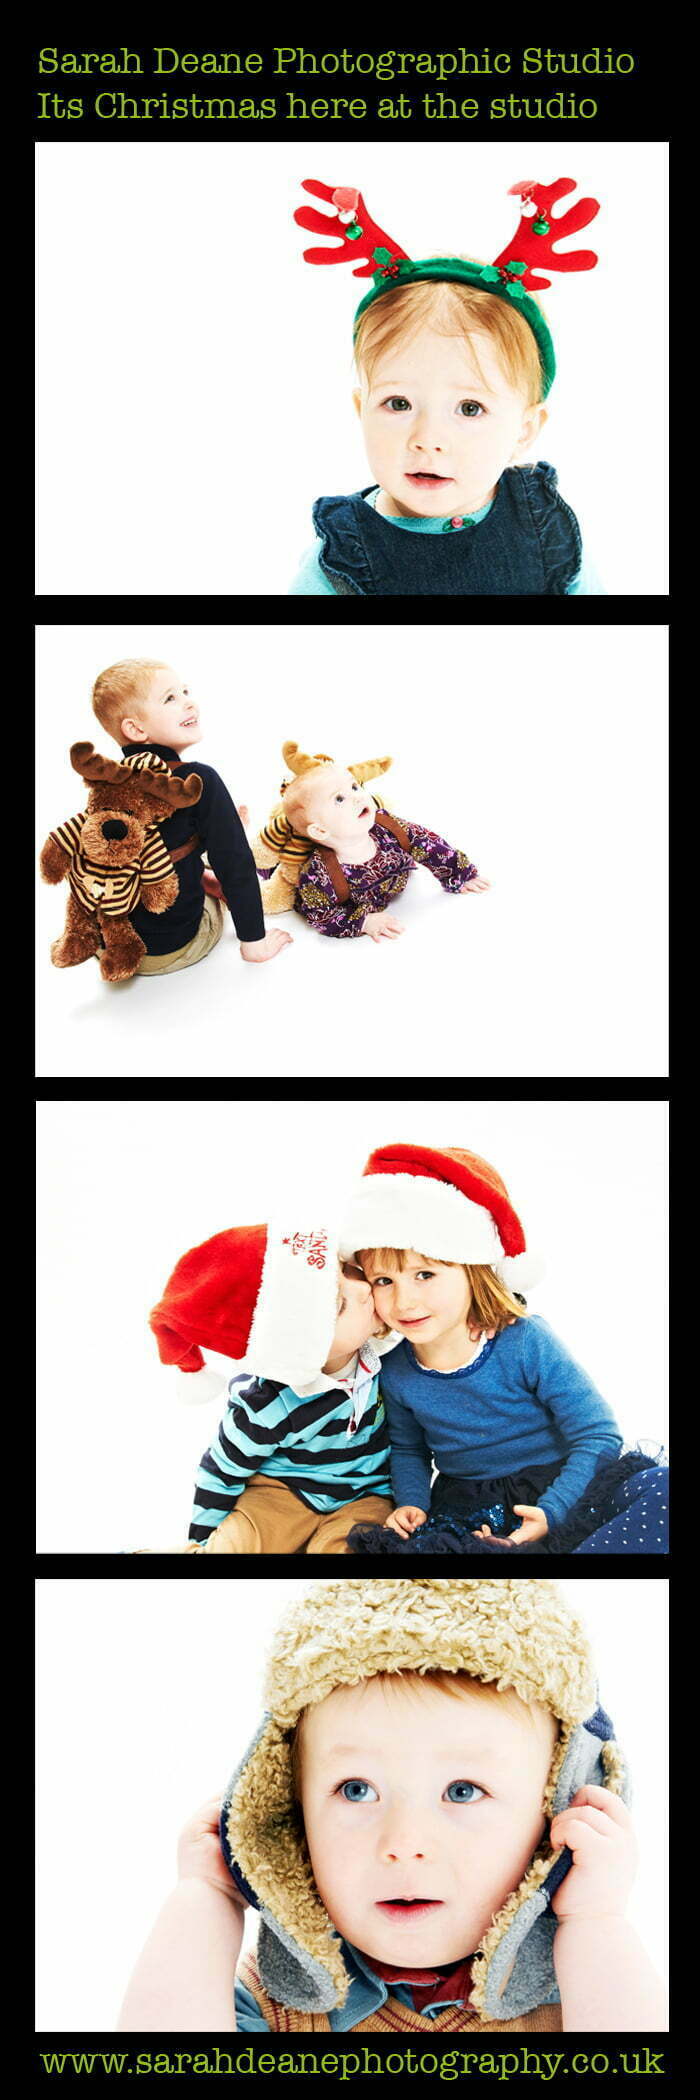 Christmas portraits in the studio, hats, scarfs and reindeer antlers!